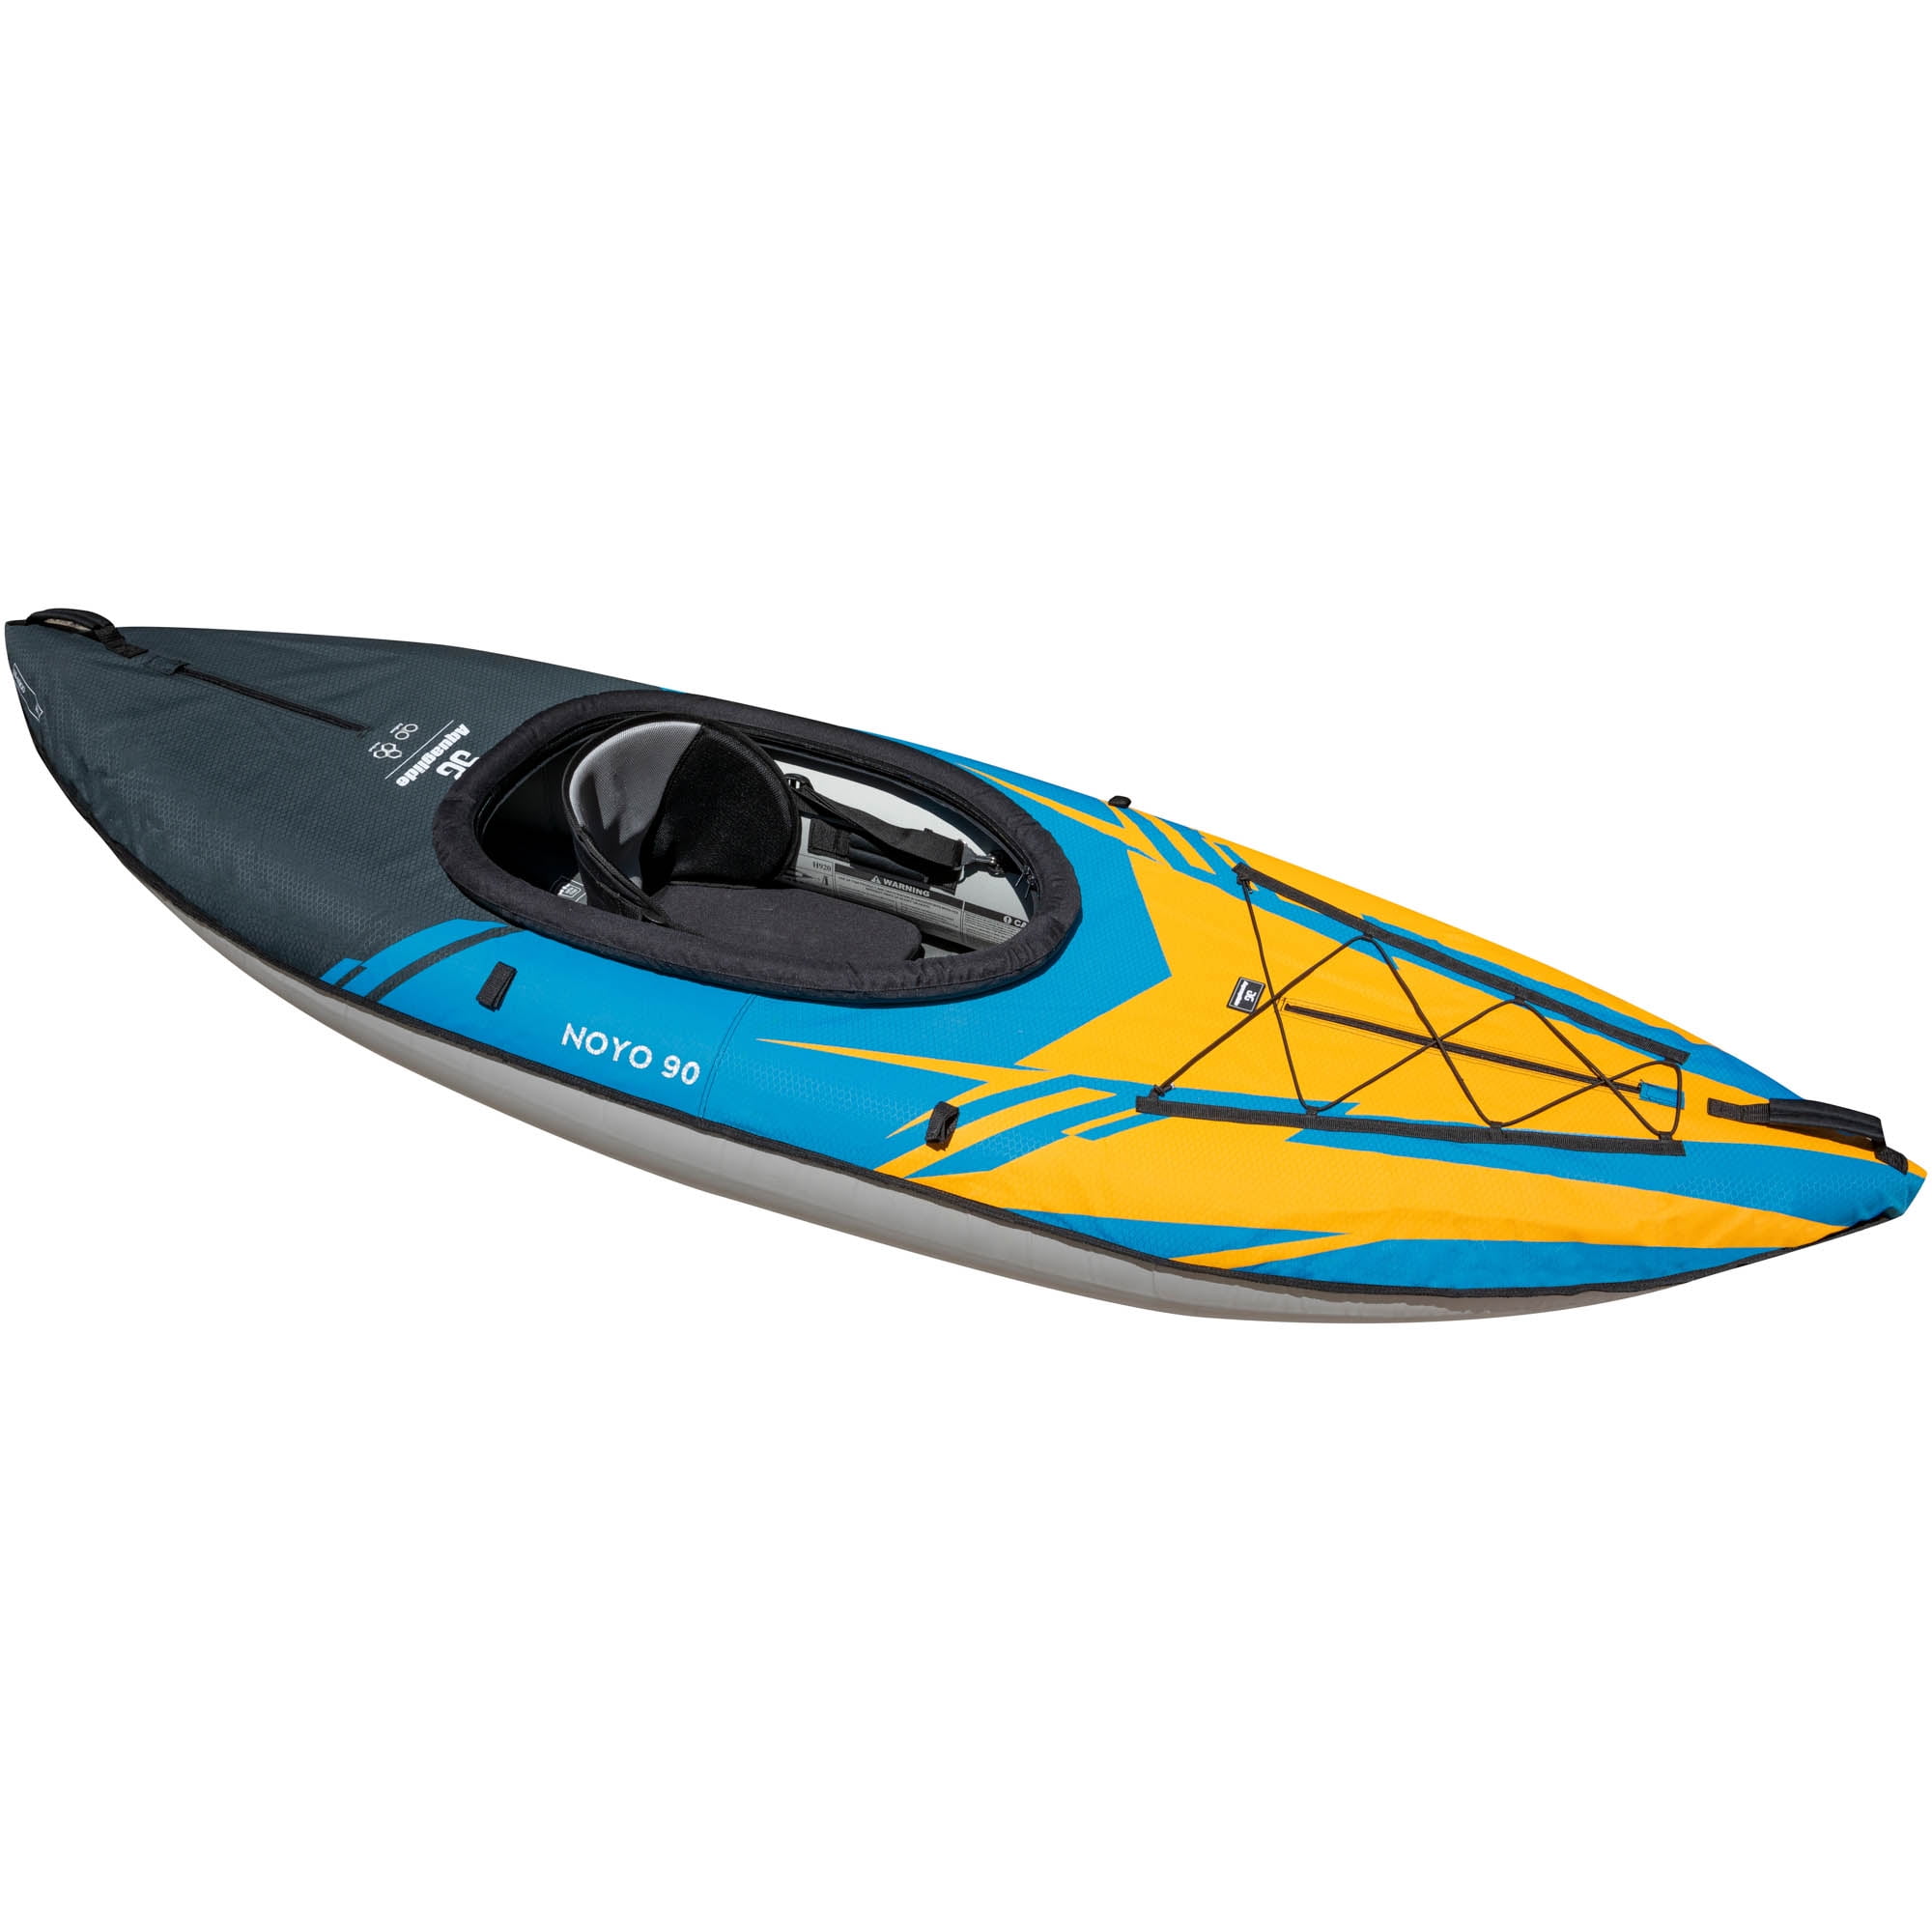 Aquaglide Noyo 90 Inflatable Kayak - 1 Person Touring with Cover - Walmart.com